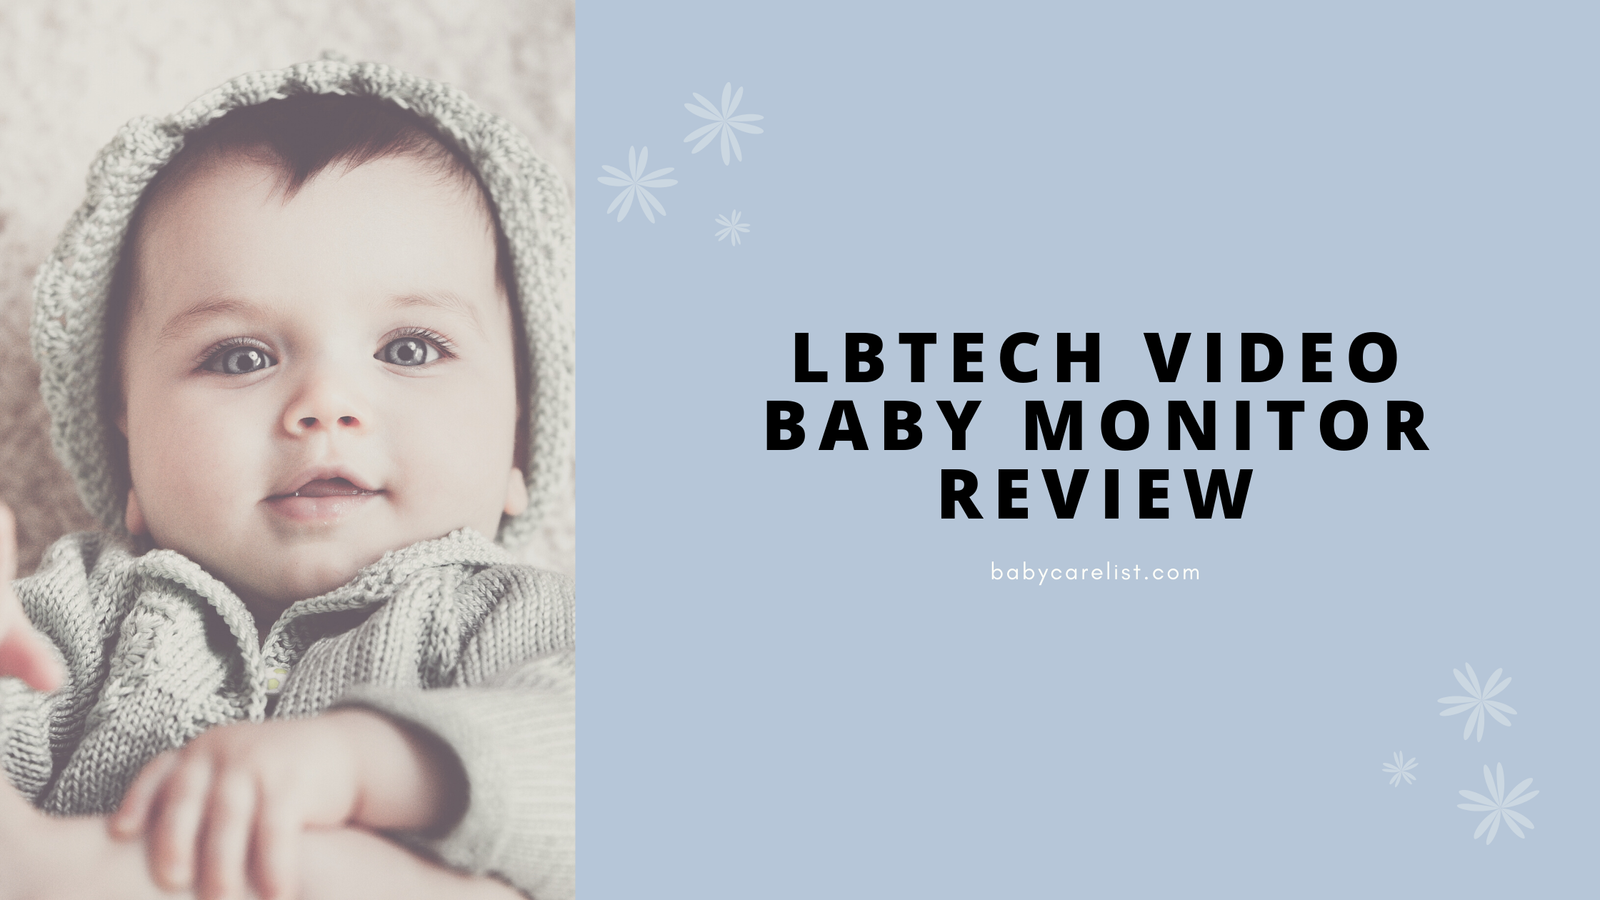 LBTECH VIDEO BABY MONITOR REVIEW